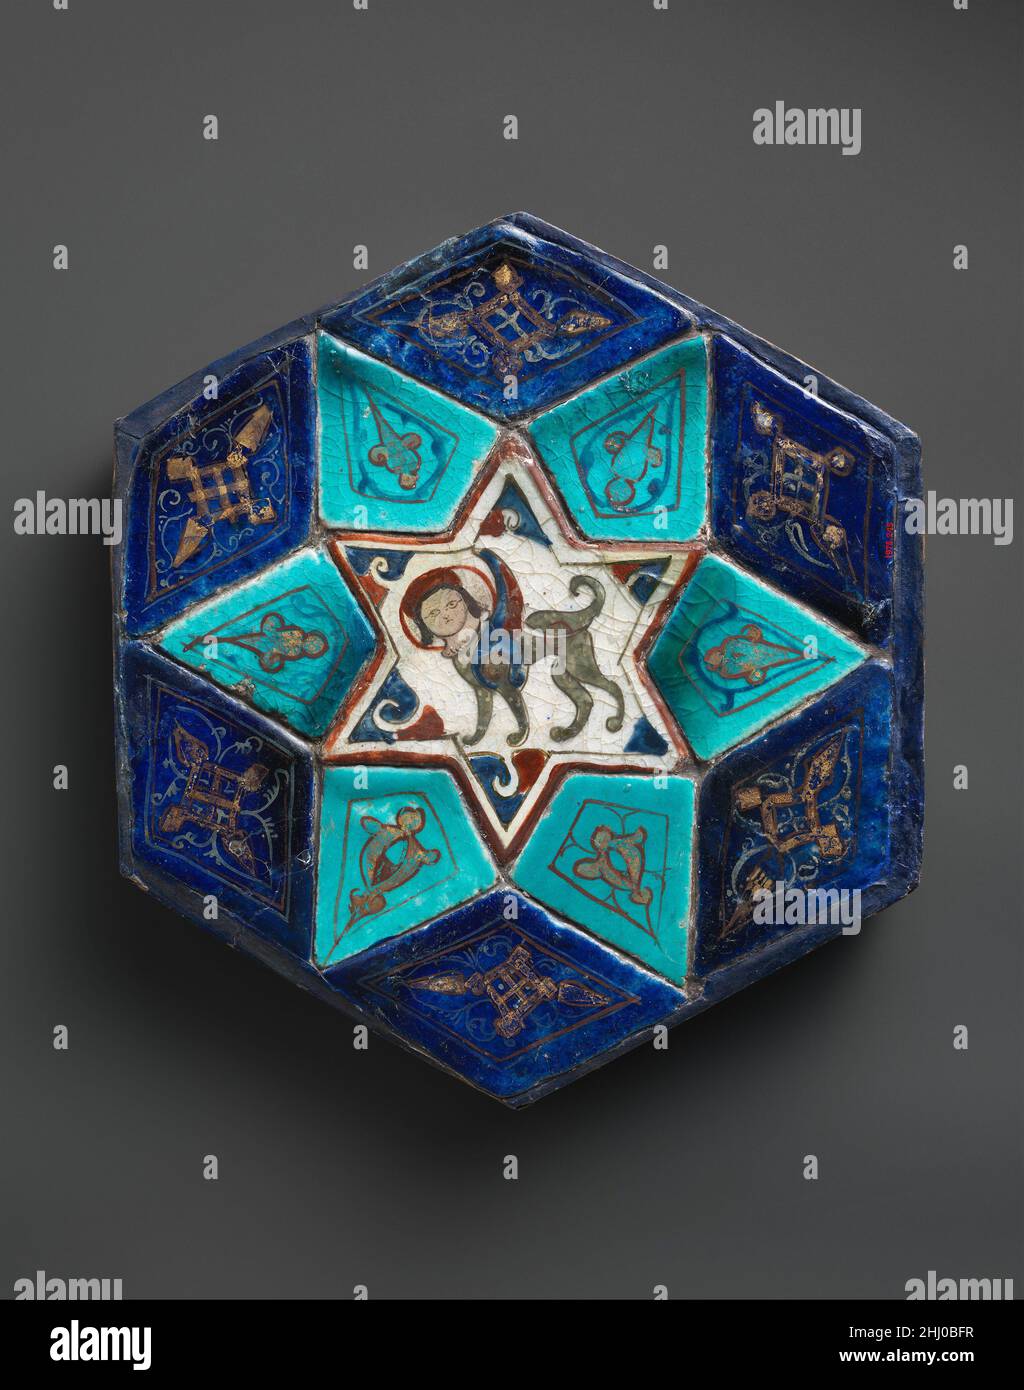 Hexagonal Tile Ensemble with Sphinx ca. 1160s–70s By the early twentieth century, the two-story Konya Köşk had largely fallen into ruin, but architectural fragments speak to its former artistic sophistication and lavish polychrome ornamentation. The upper story of this Rum Seljuq “citadel-palace” was dominated by an iwan with balconies on three sides facing outward over the sultanate’s capital, Konya, thereby functioning as both a belvedere and a point from which the sultan could consider his dominion. The luxurious mina˒i ceramic technique of these tiles is reminiscent of that associated with Stock Photo